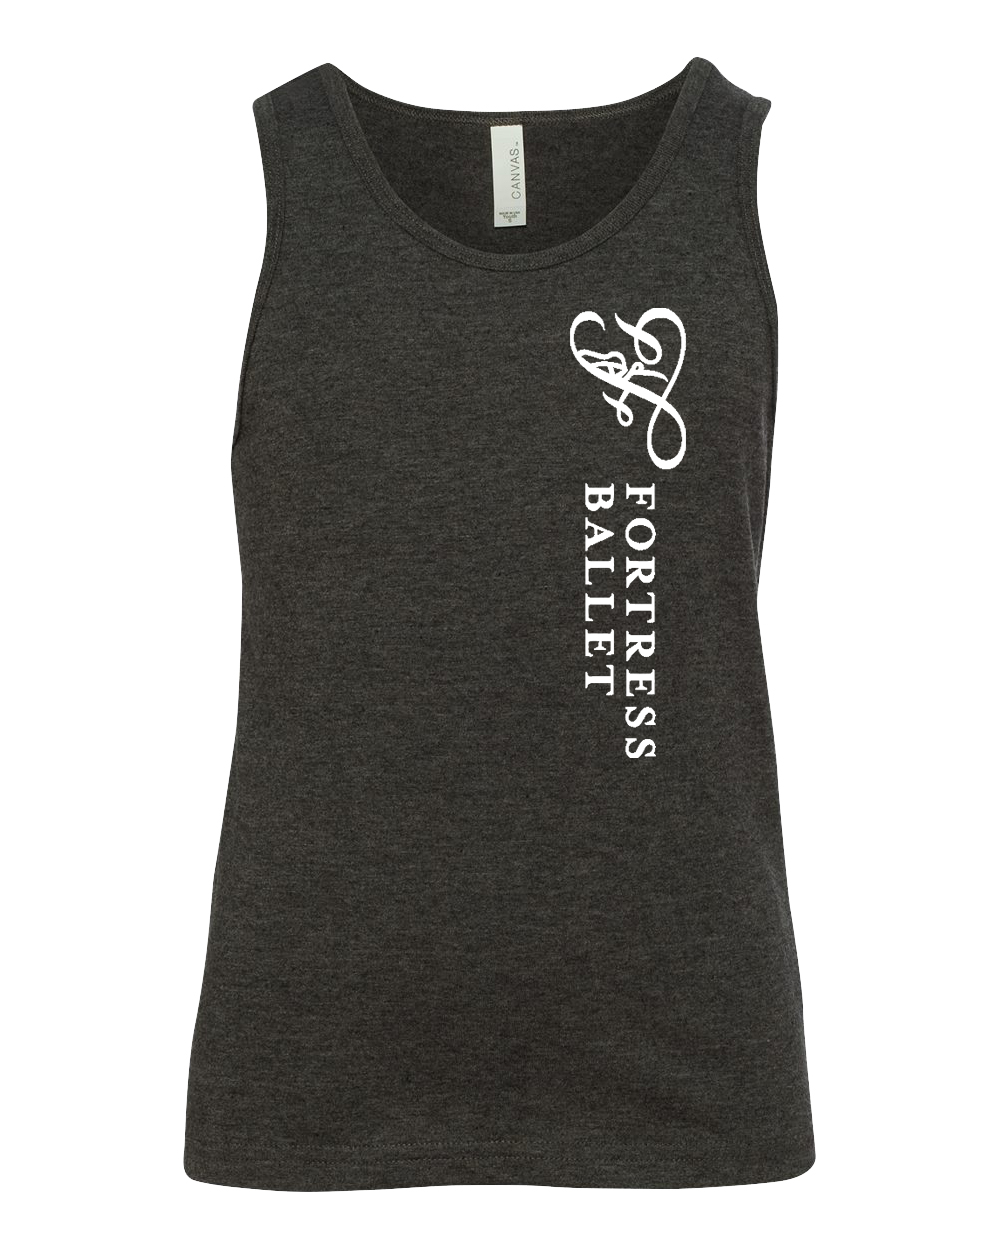 Fortress Ballet Adult Tank Top - Atomic